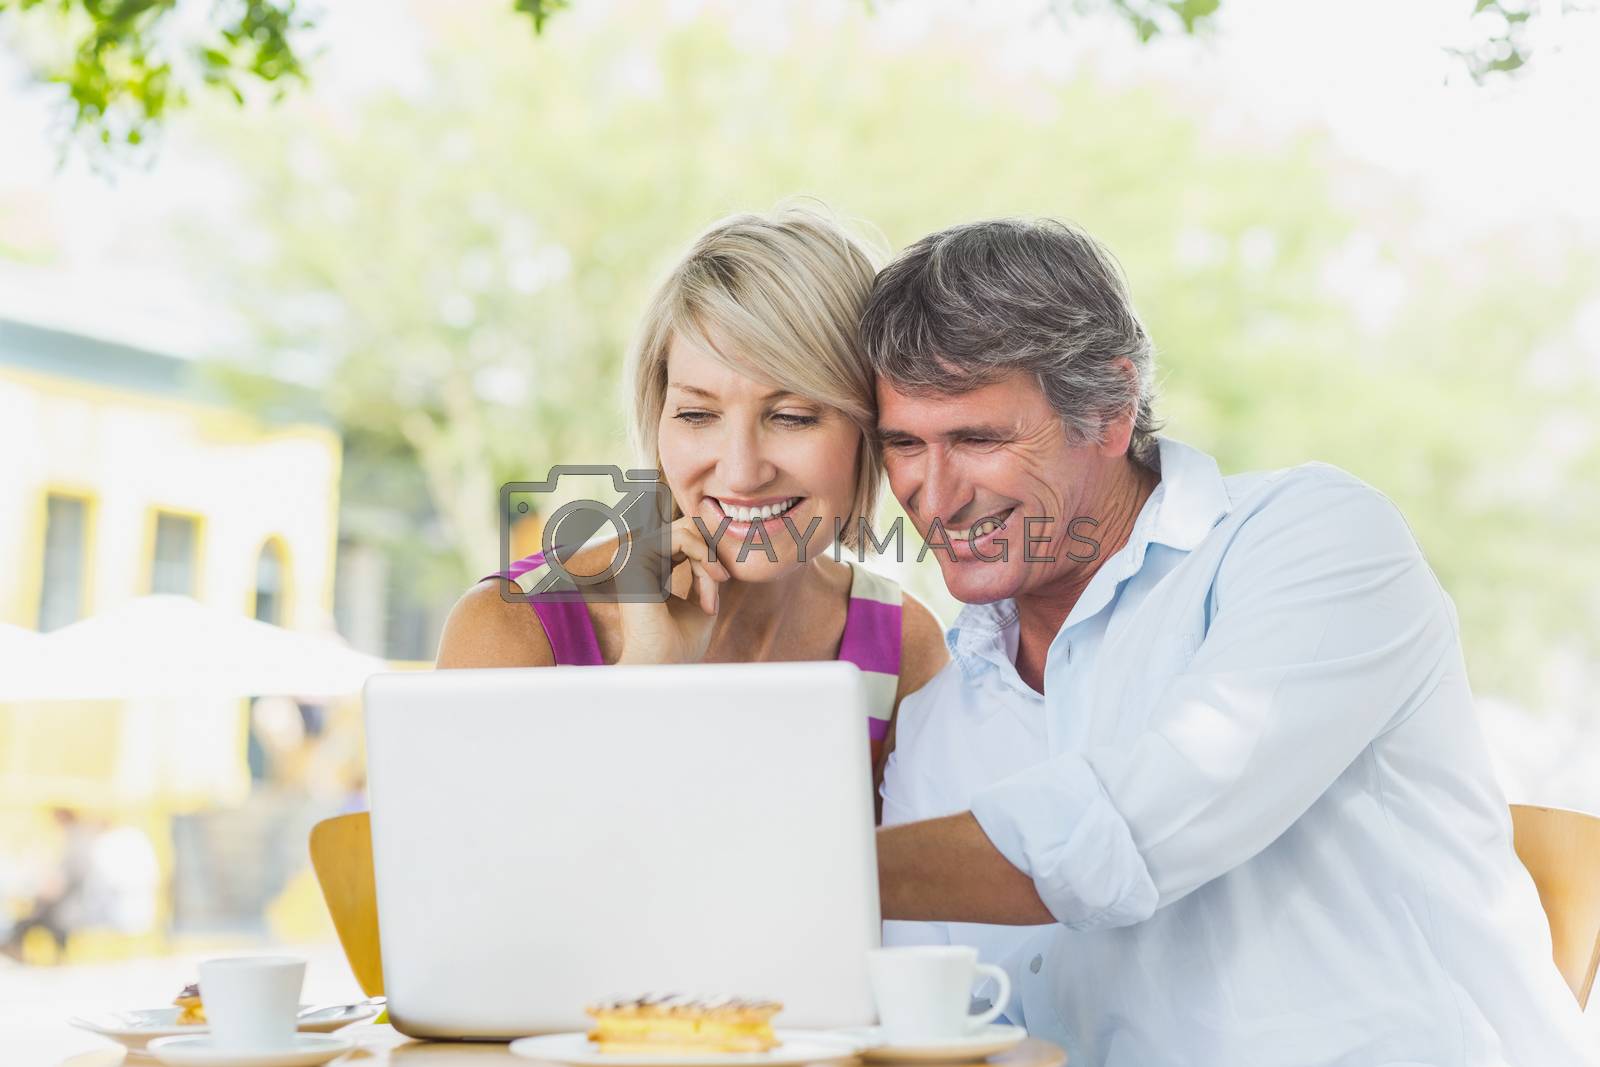 Royalty free image of Couple using laptop at cafe by Wavebreakmedia